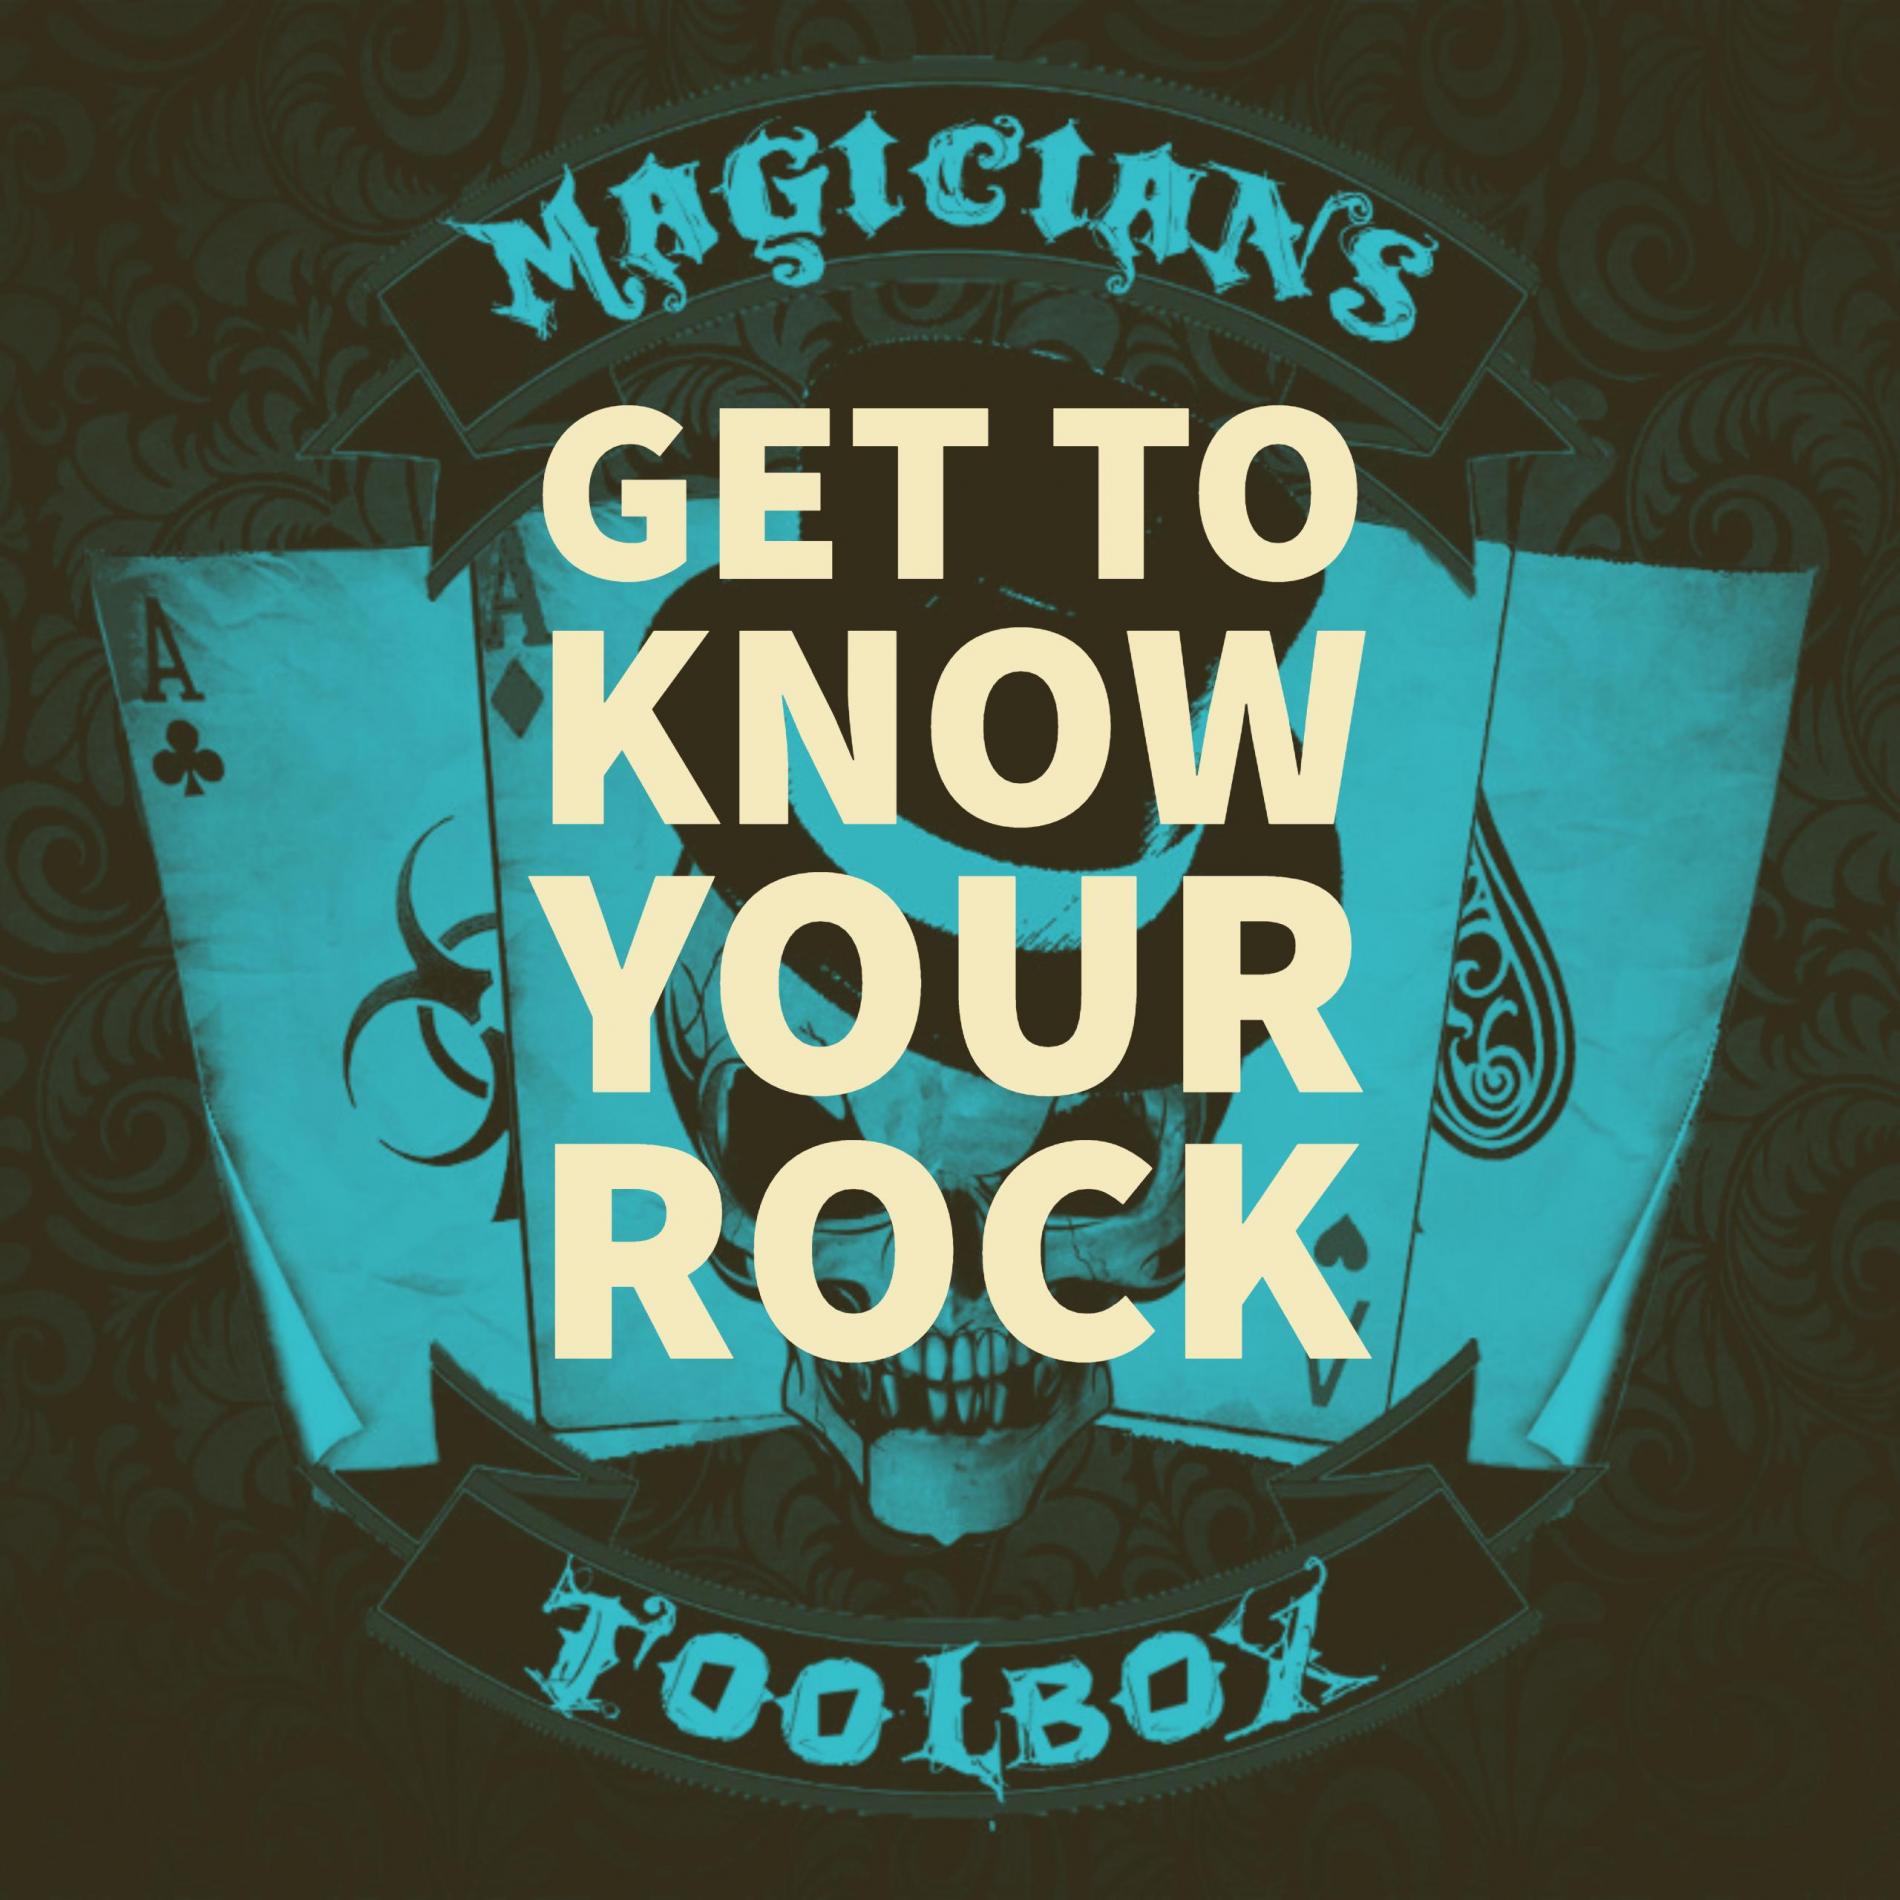 Get To Know Your Rock : Magicians ToolBox